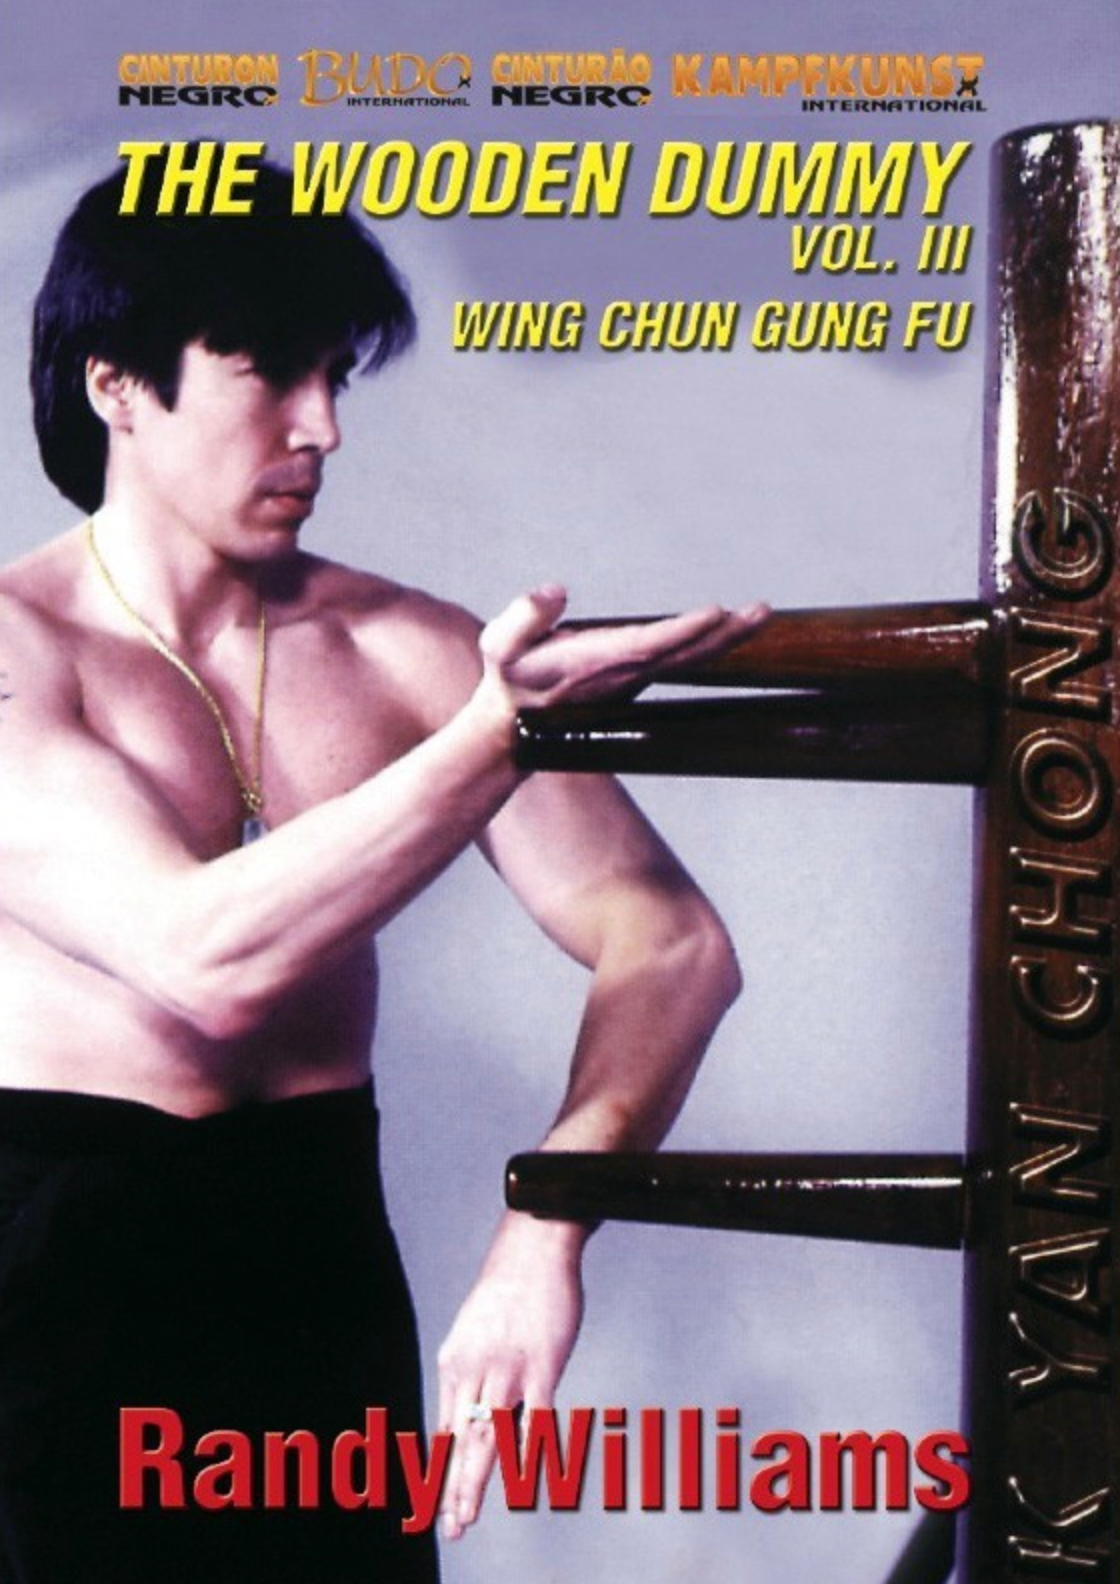 Wing Chun Wooden Dummy Form Part 3 DVD by Randy Williams - Budovideos Inc